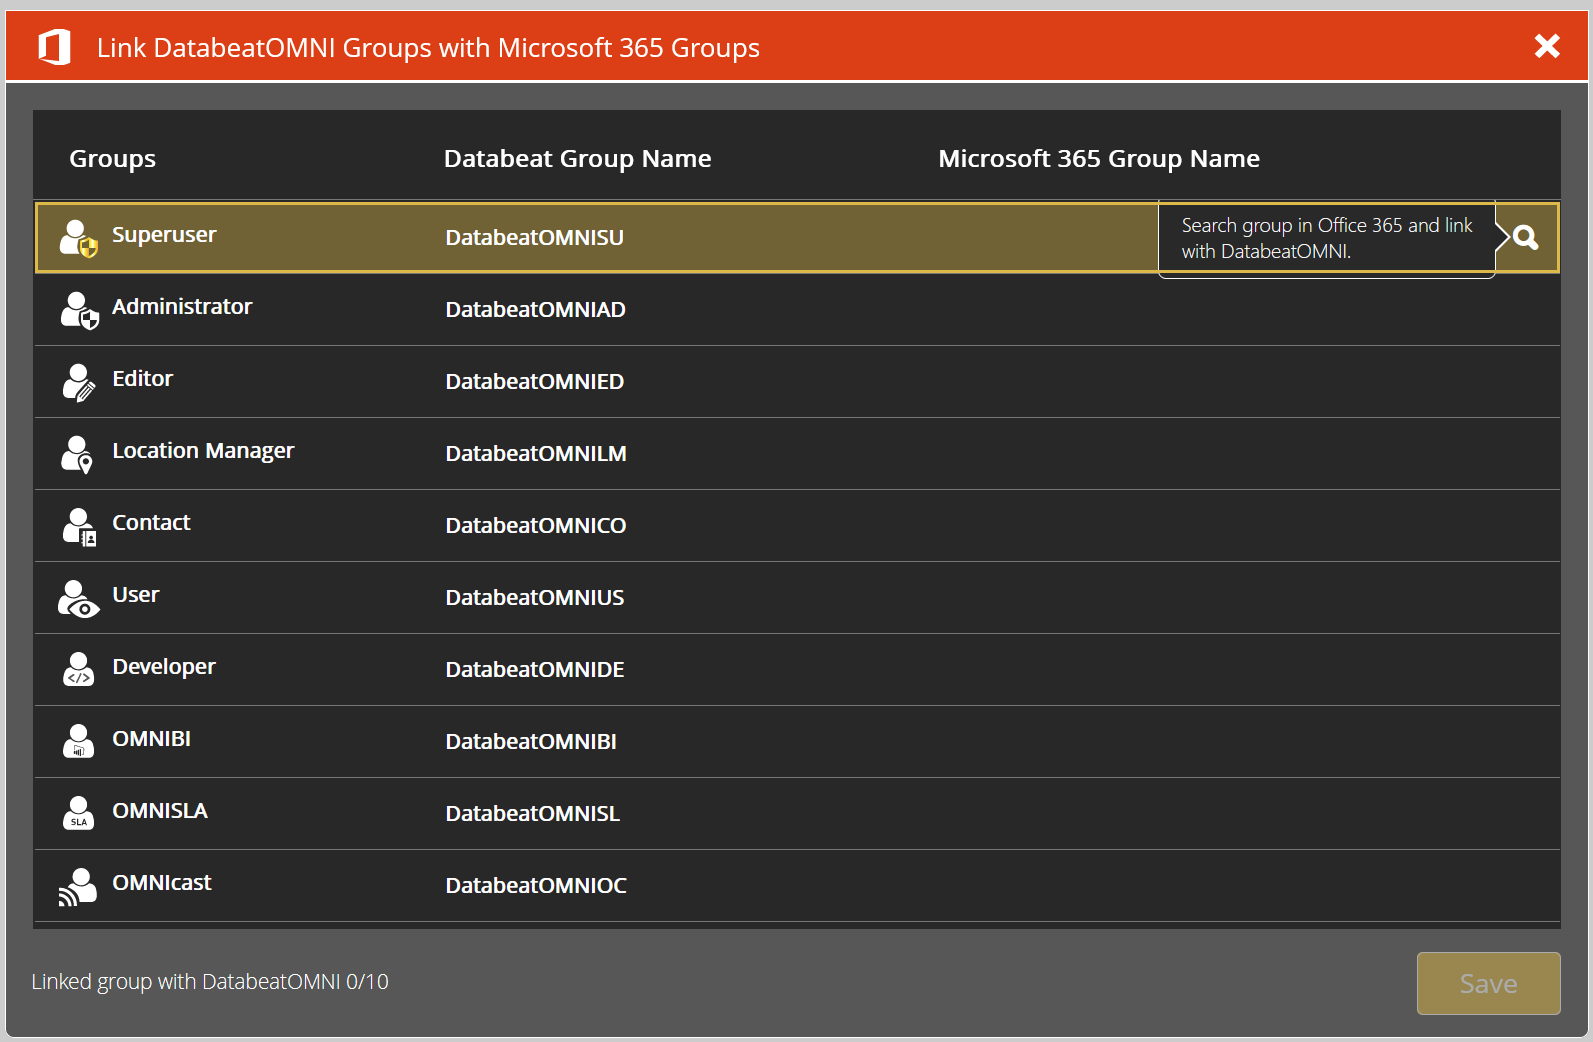 DatabeatOMNI roles you can link to Microsoft 365 groups